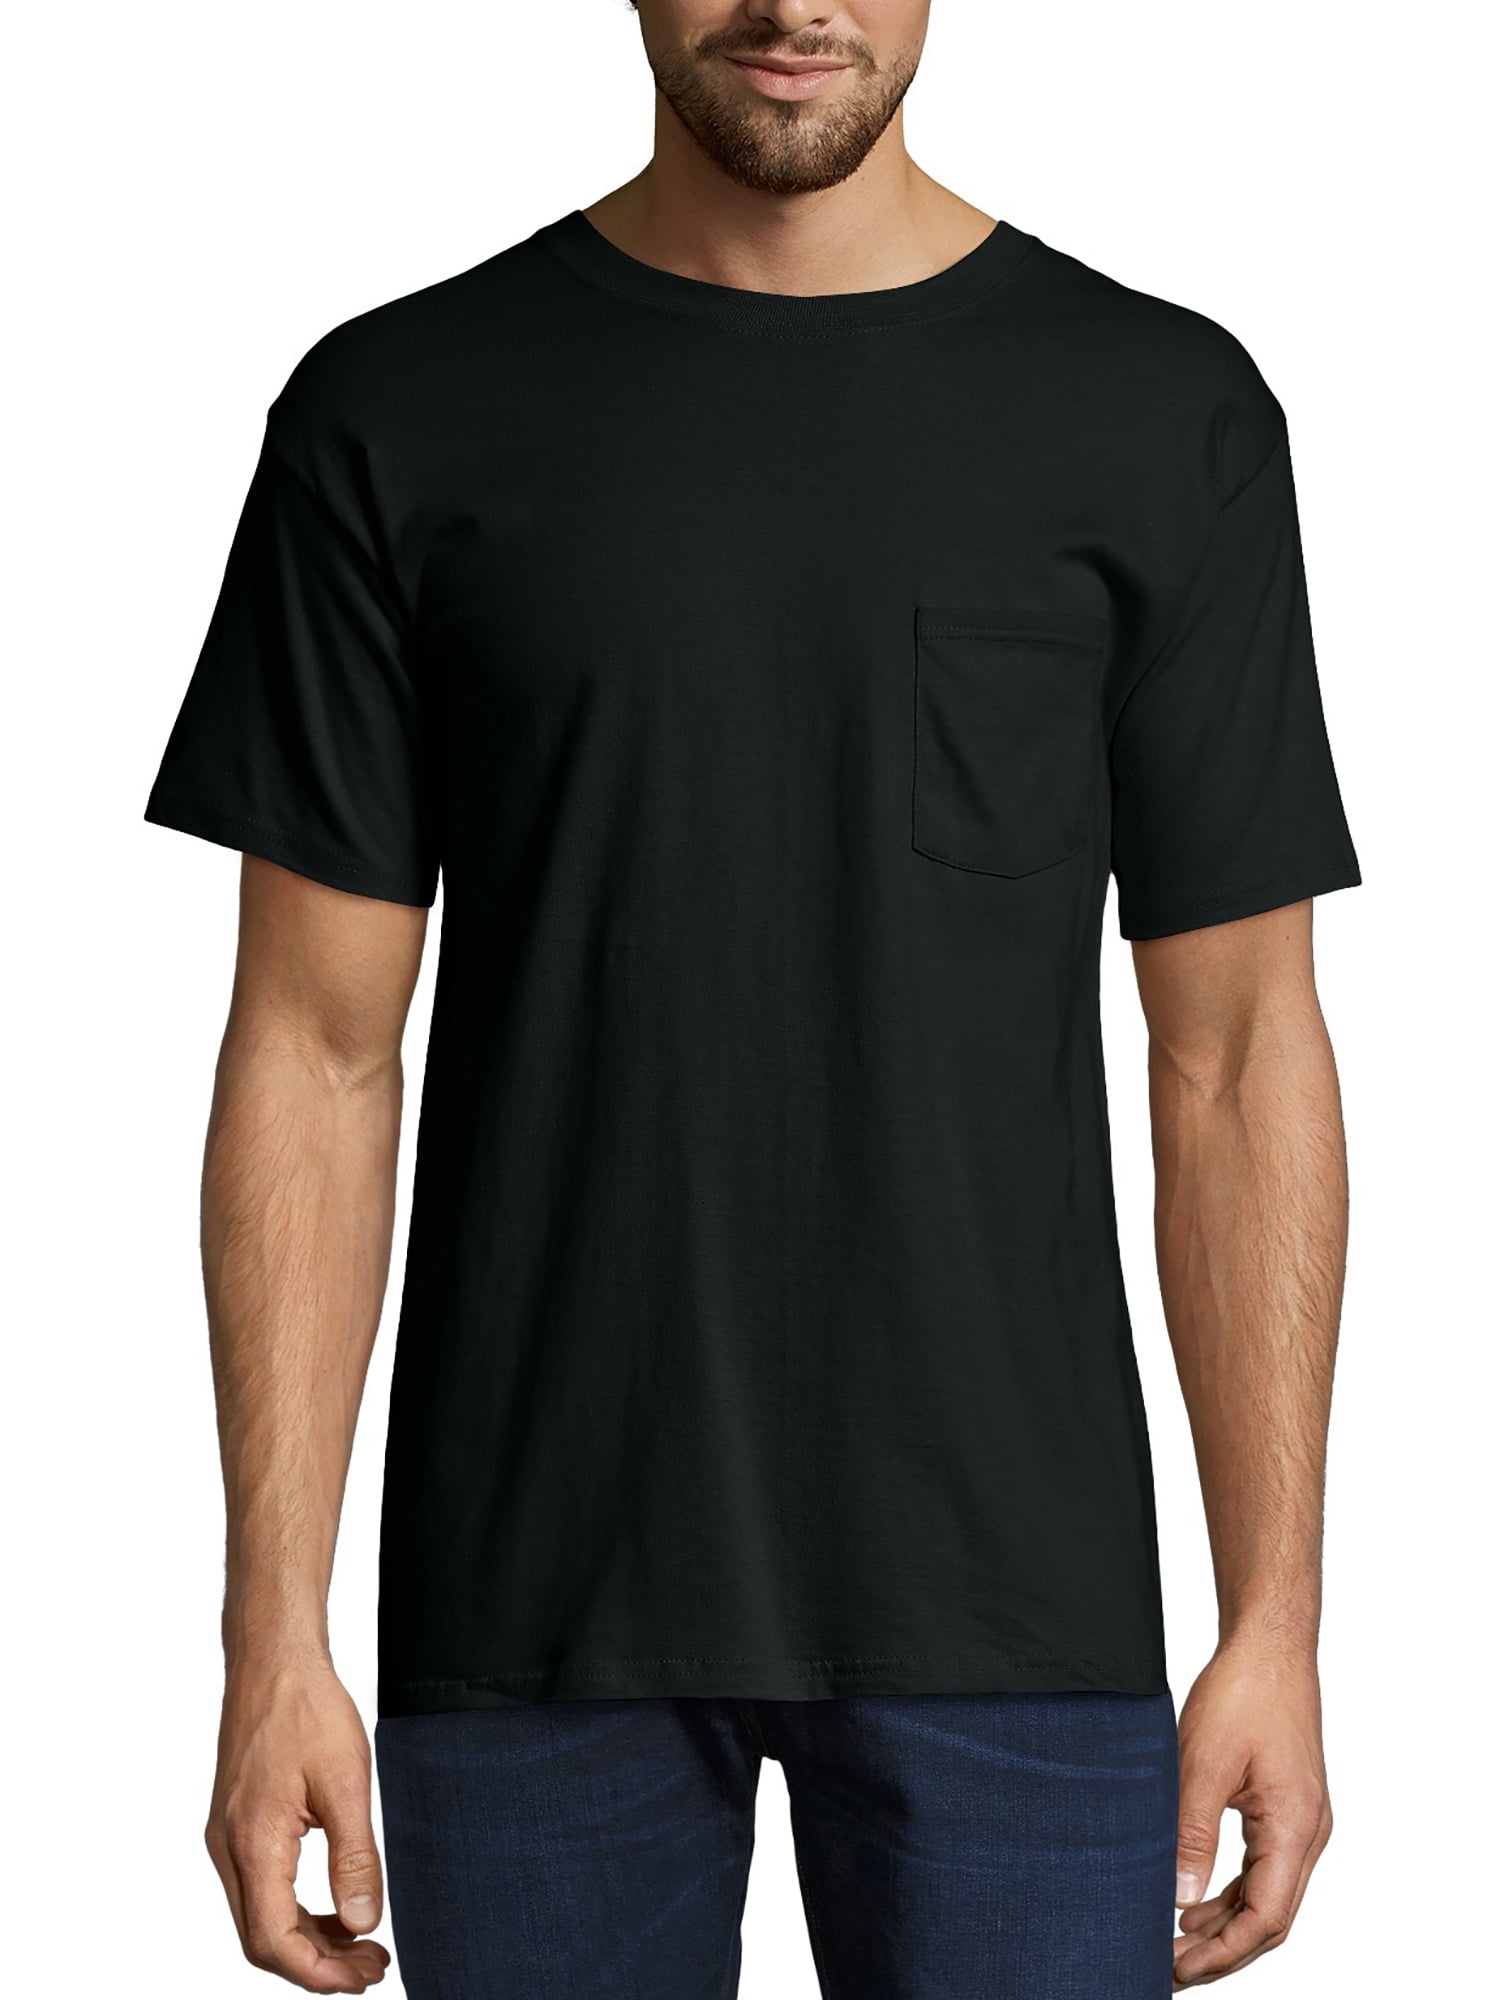 Hanes Men's Premium Beefy-T Short Sleeve T-Shirt With Pocket, up to Sizes  3XL